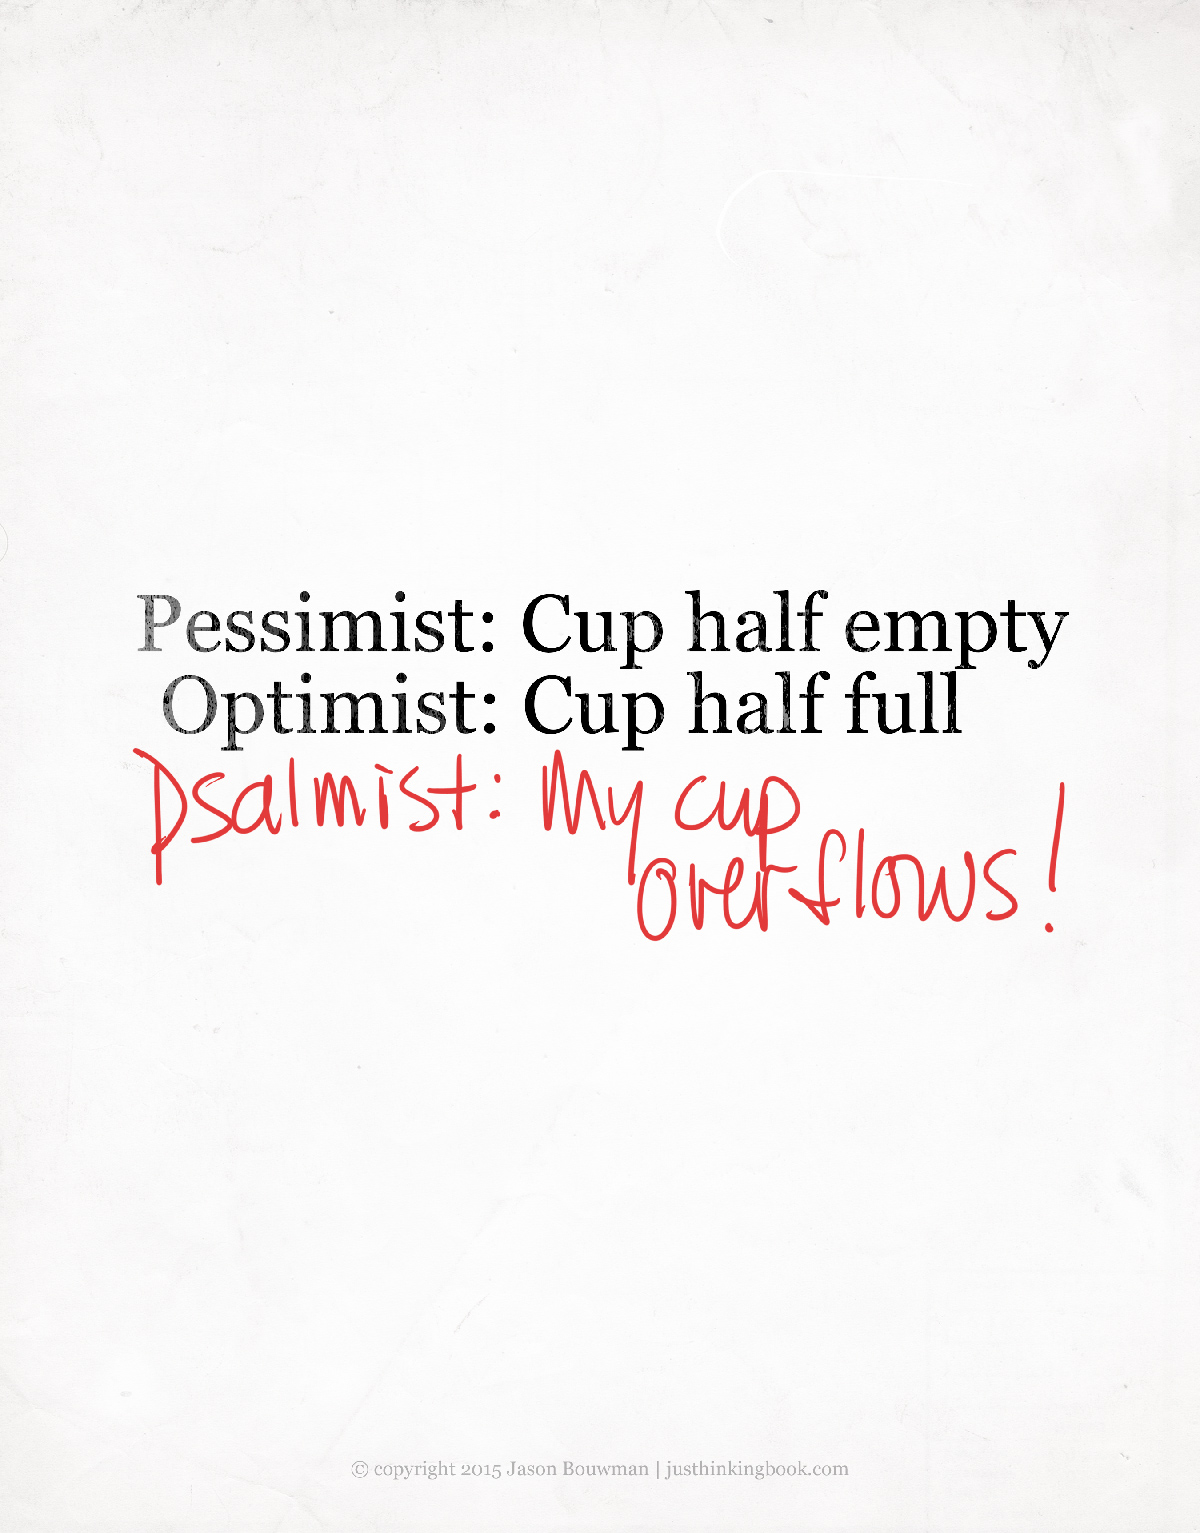 Poster: Cup Half Full